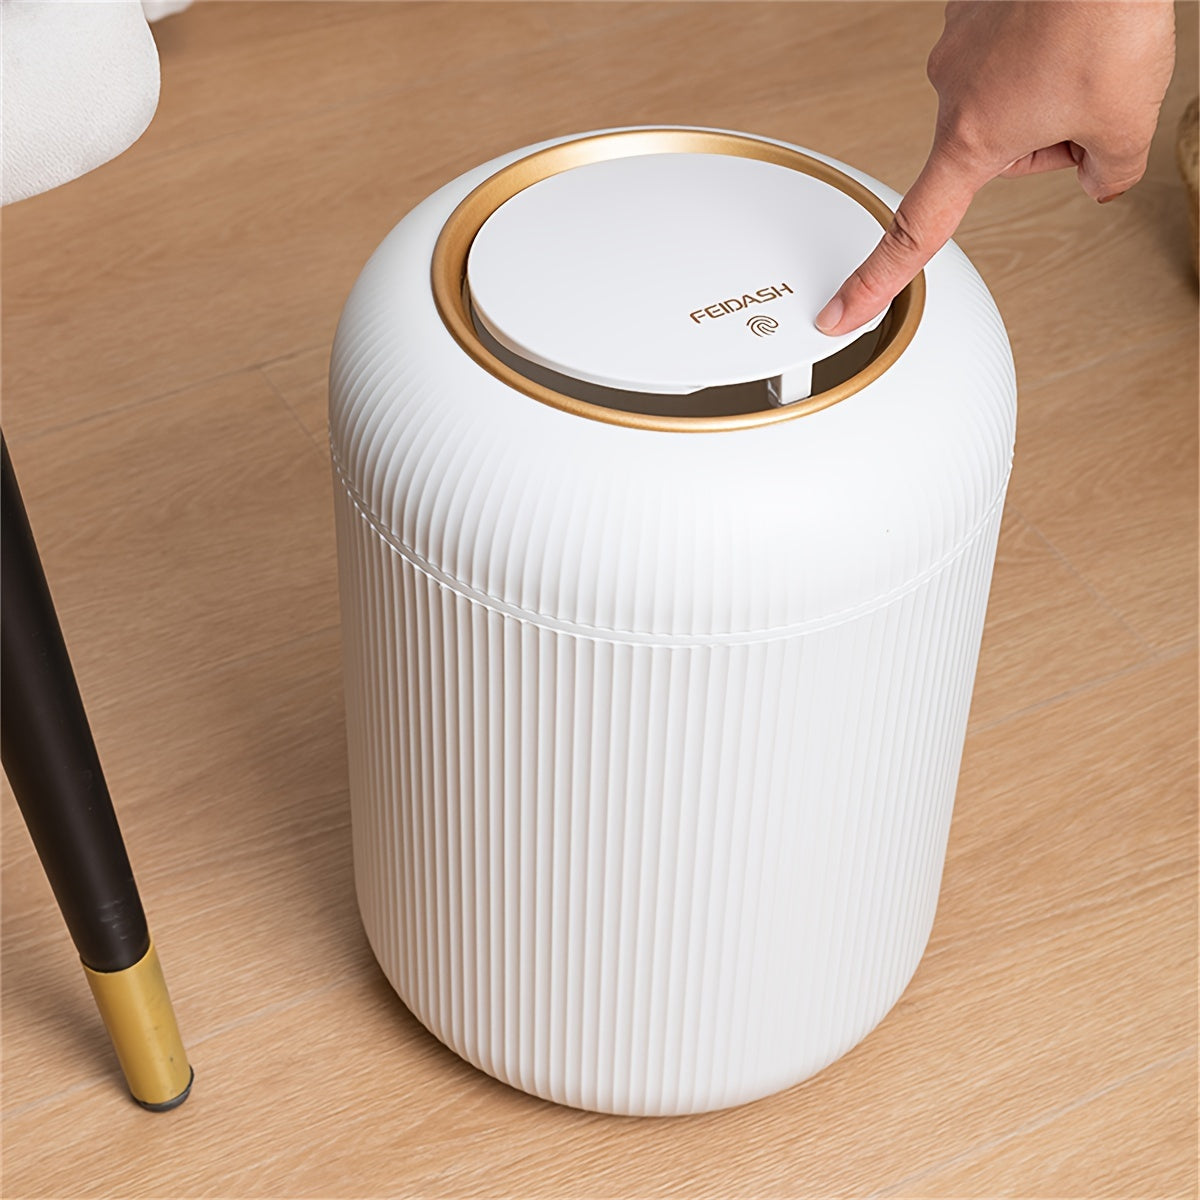 0.79/2.51gal Anti Odor Trash Bin With Lid - Simple & Fashionable Plastic Trash Can for Kitchen, Living Room, Bathroom - Mini Study Dressing Table Desktop Trash Can - Office, Car & Home Accessories